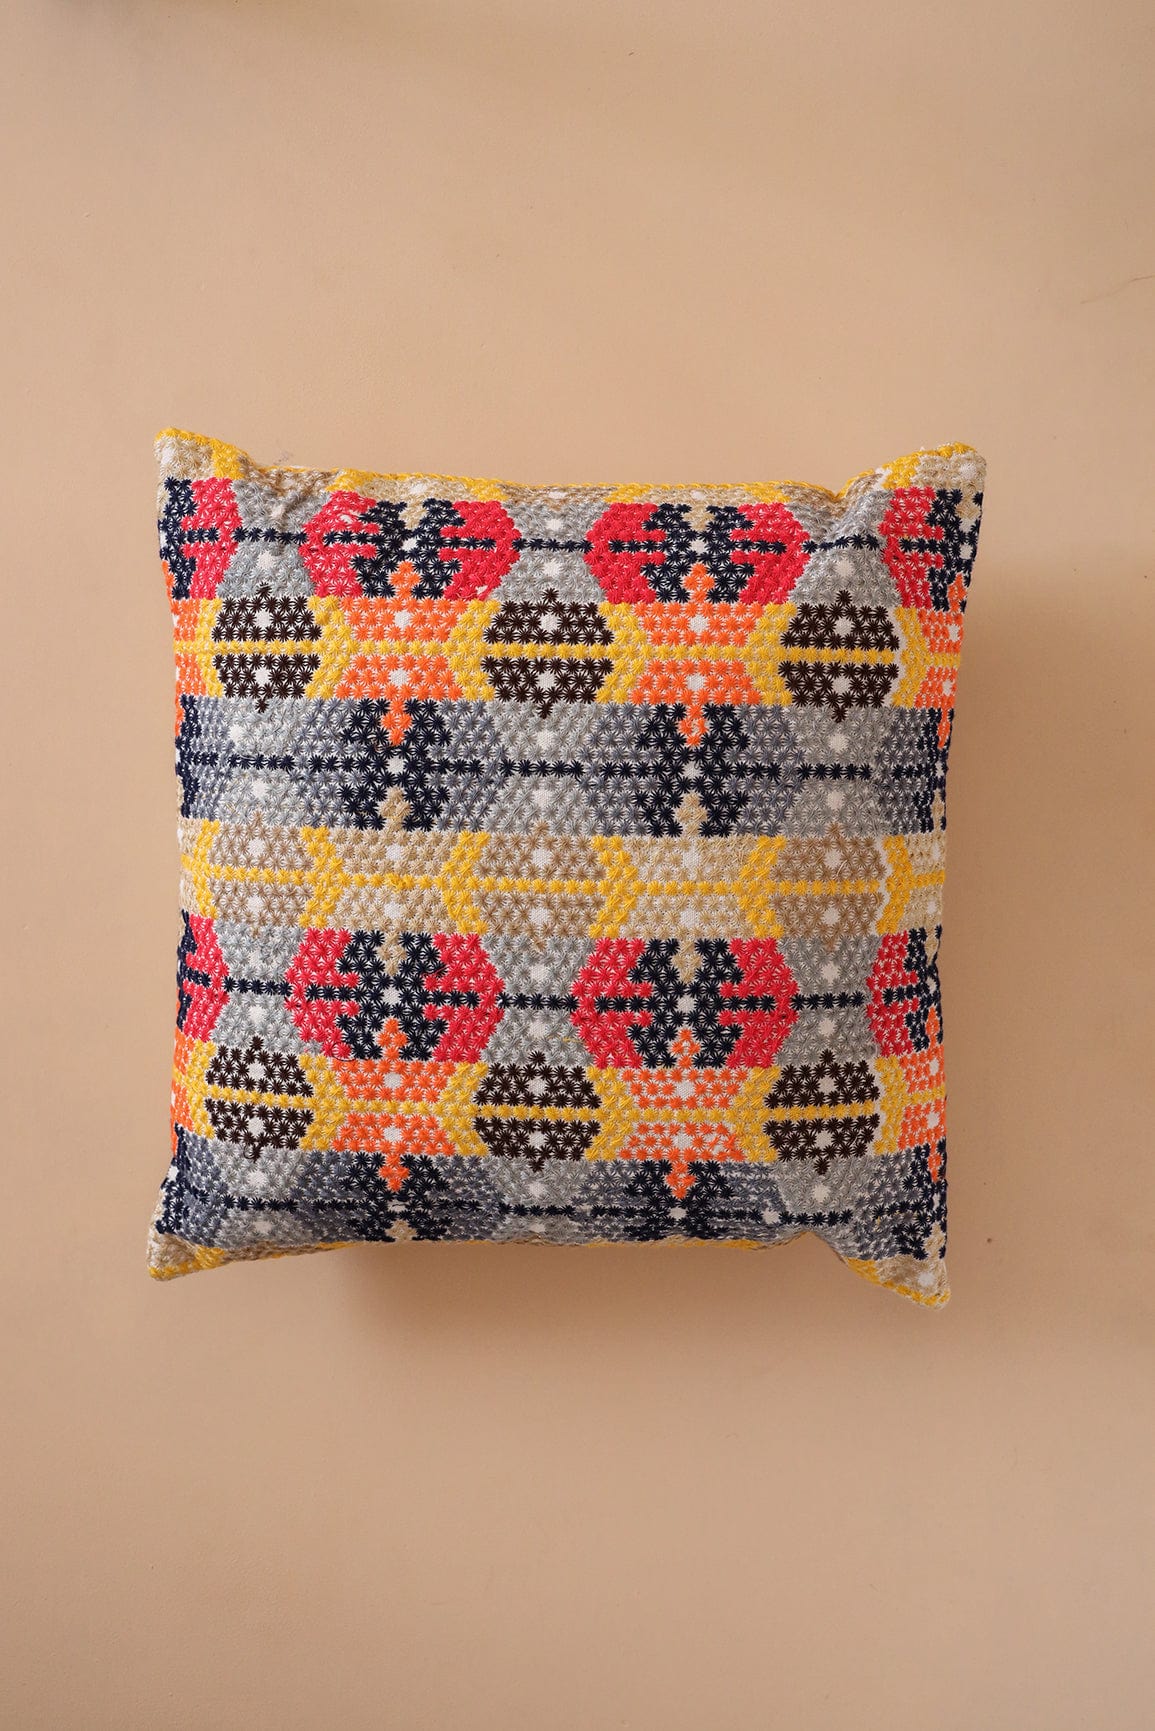 doeraa Dotted Pattern Multi Colour Embroidery on off white cotton Cushion Cover (16*16 inches)